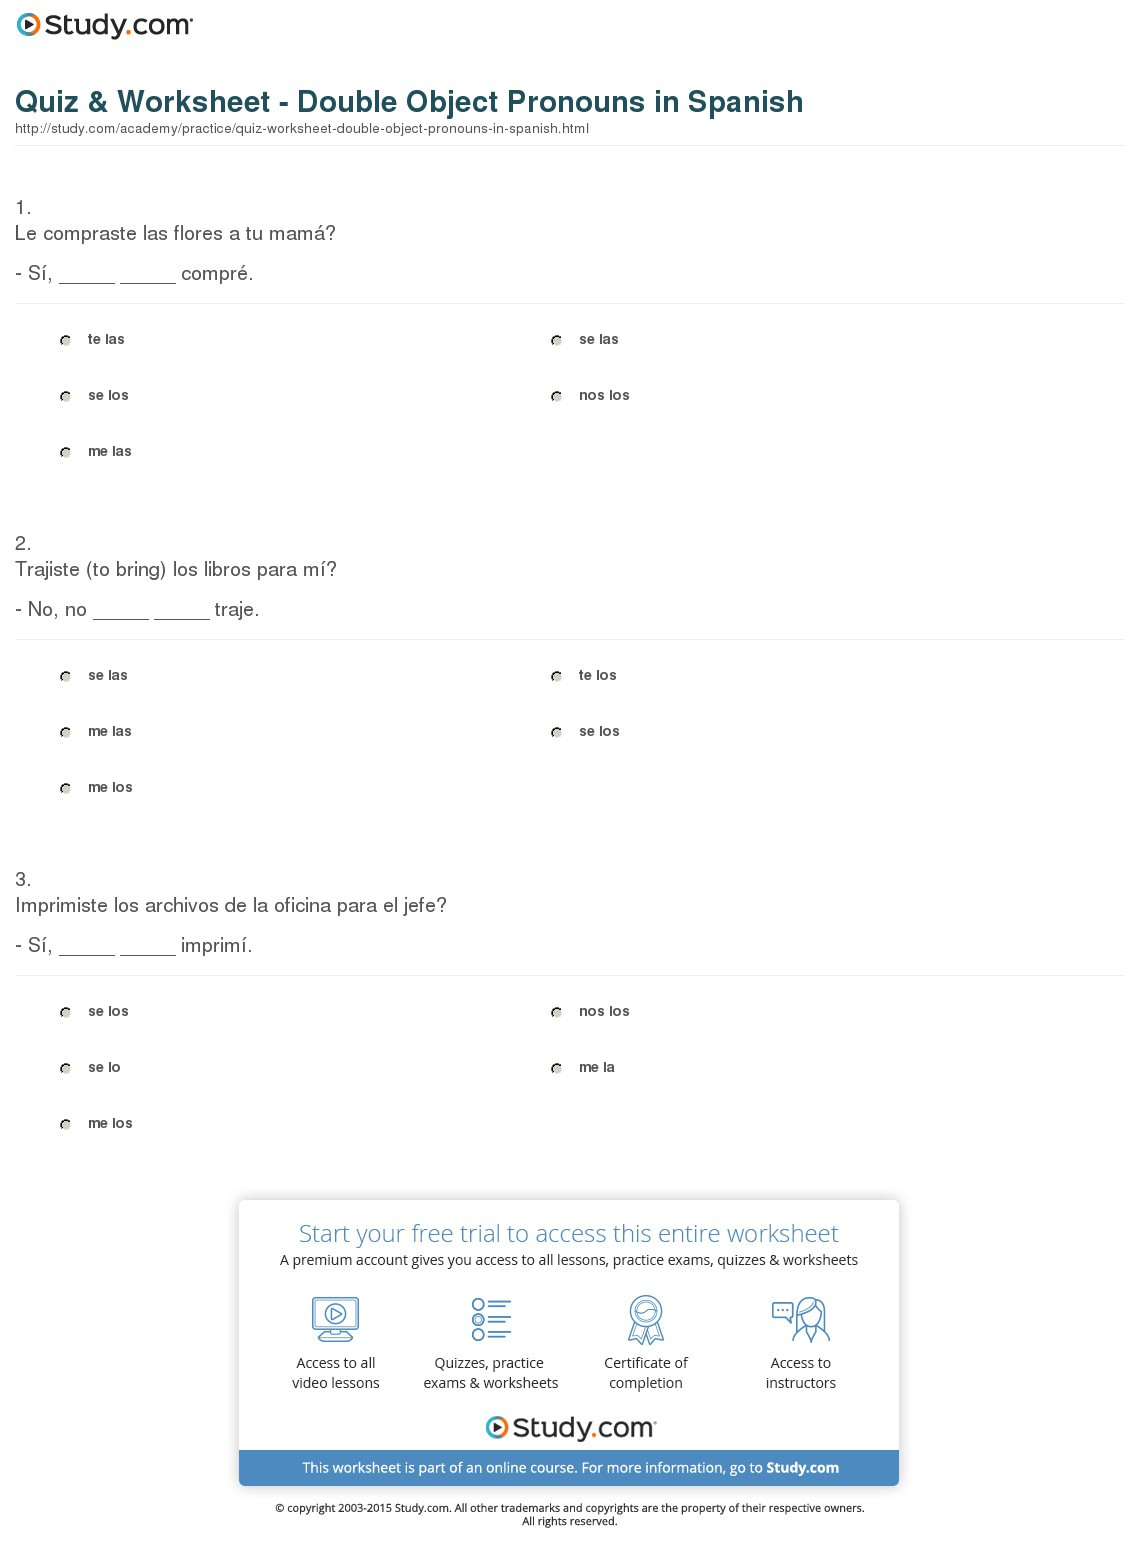 double-object-pronouns-spanish-worksheet-db-excel